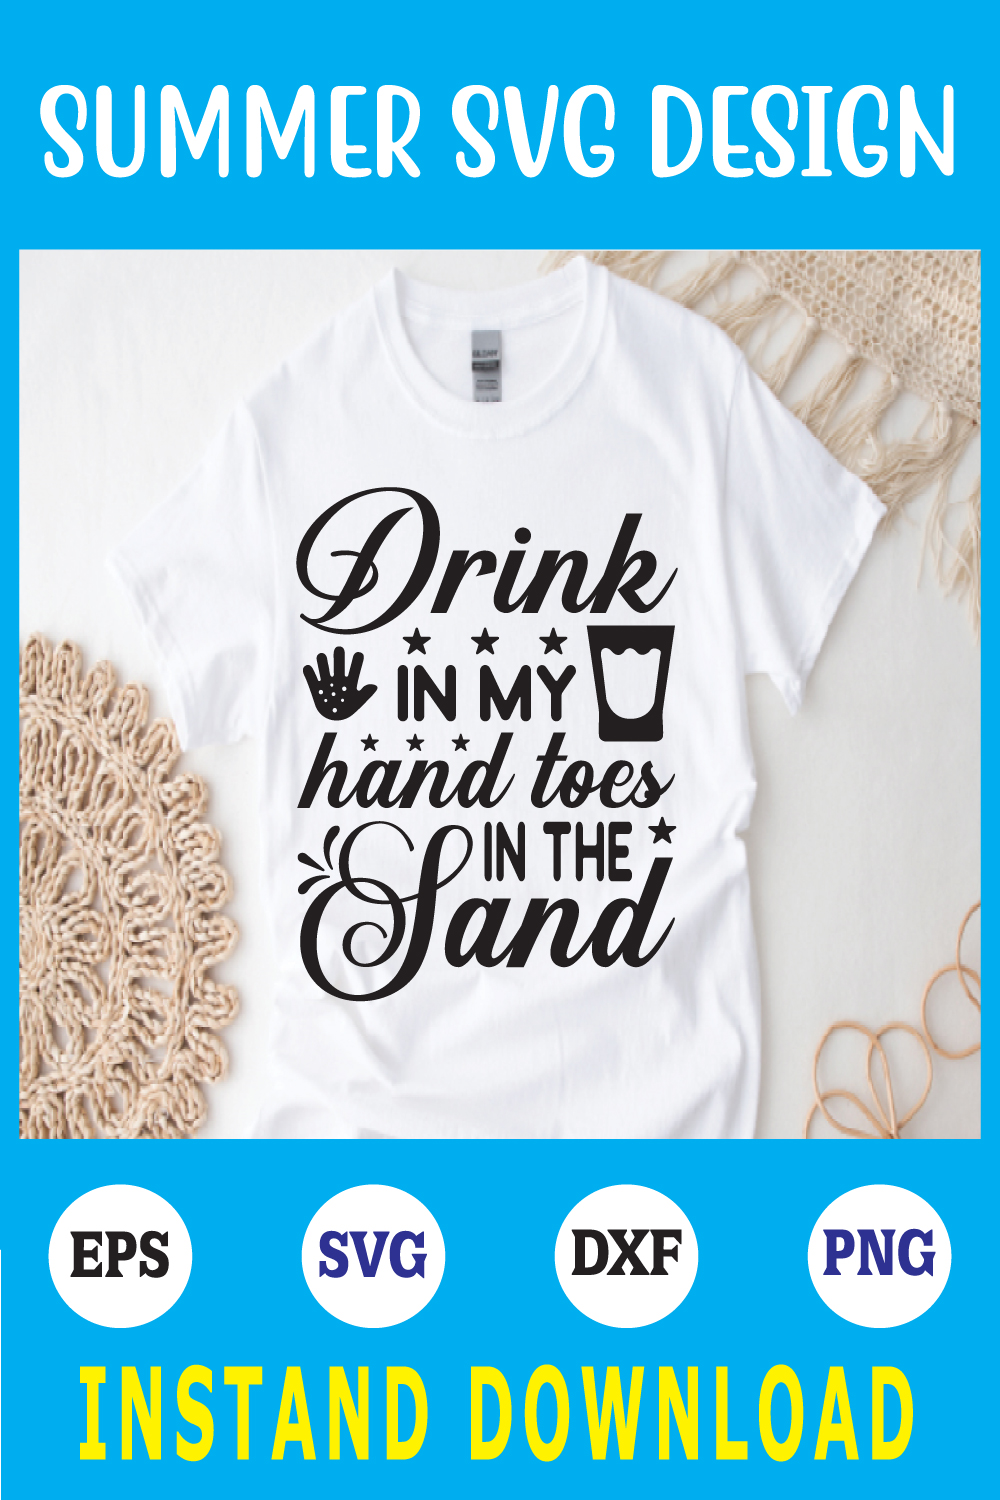 drink in my hand toes in the sand svg pinterest preview image.